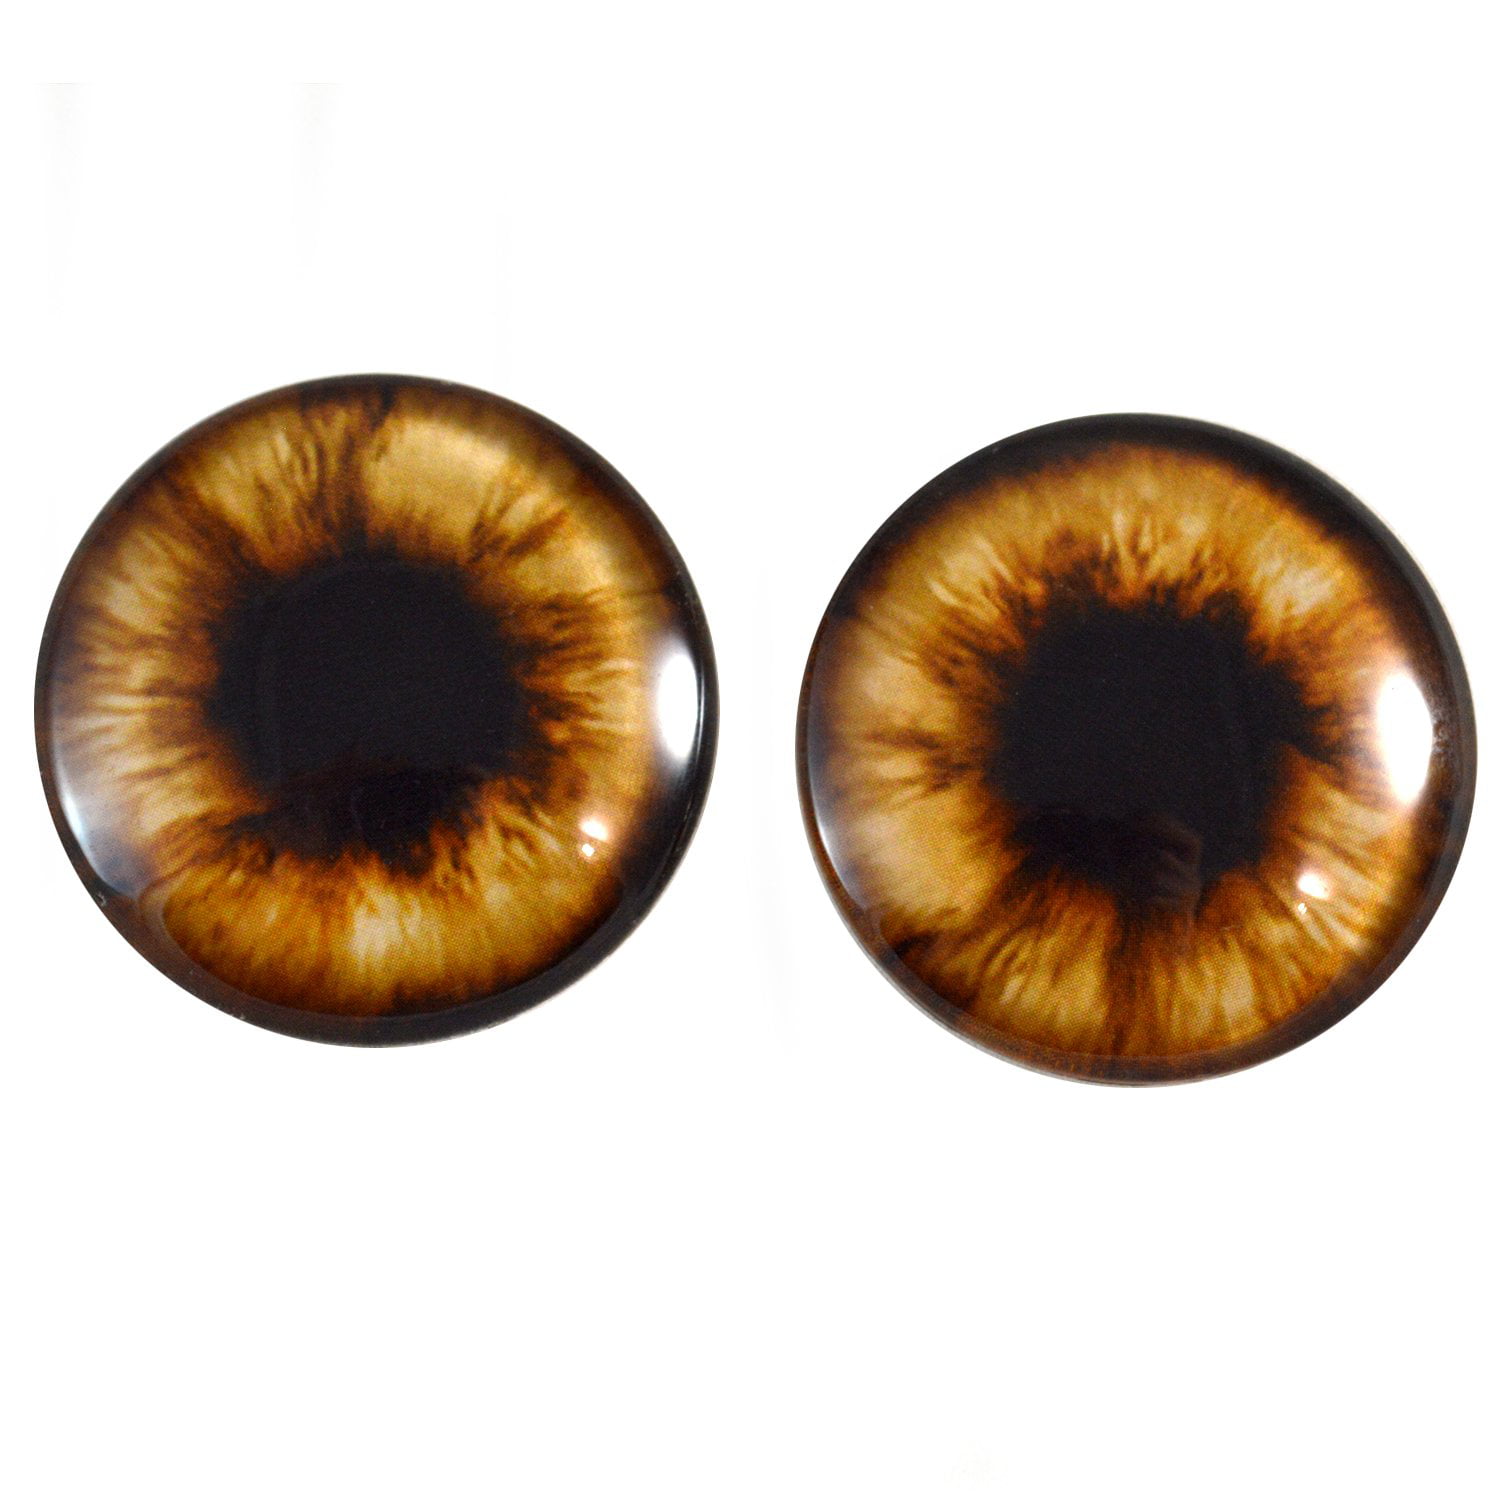 a pair vintage solid Glass Eyes size 5 mm teady bear taxidermy age 1910 Art A 98 